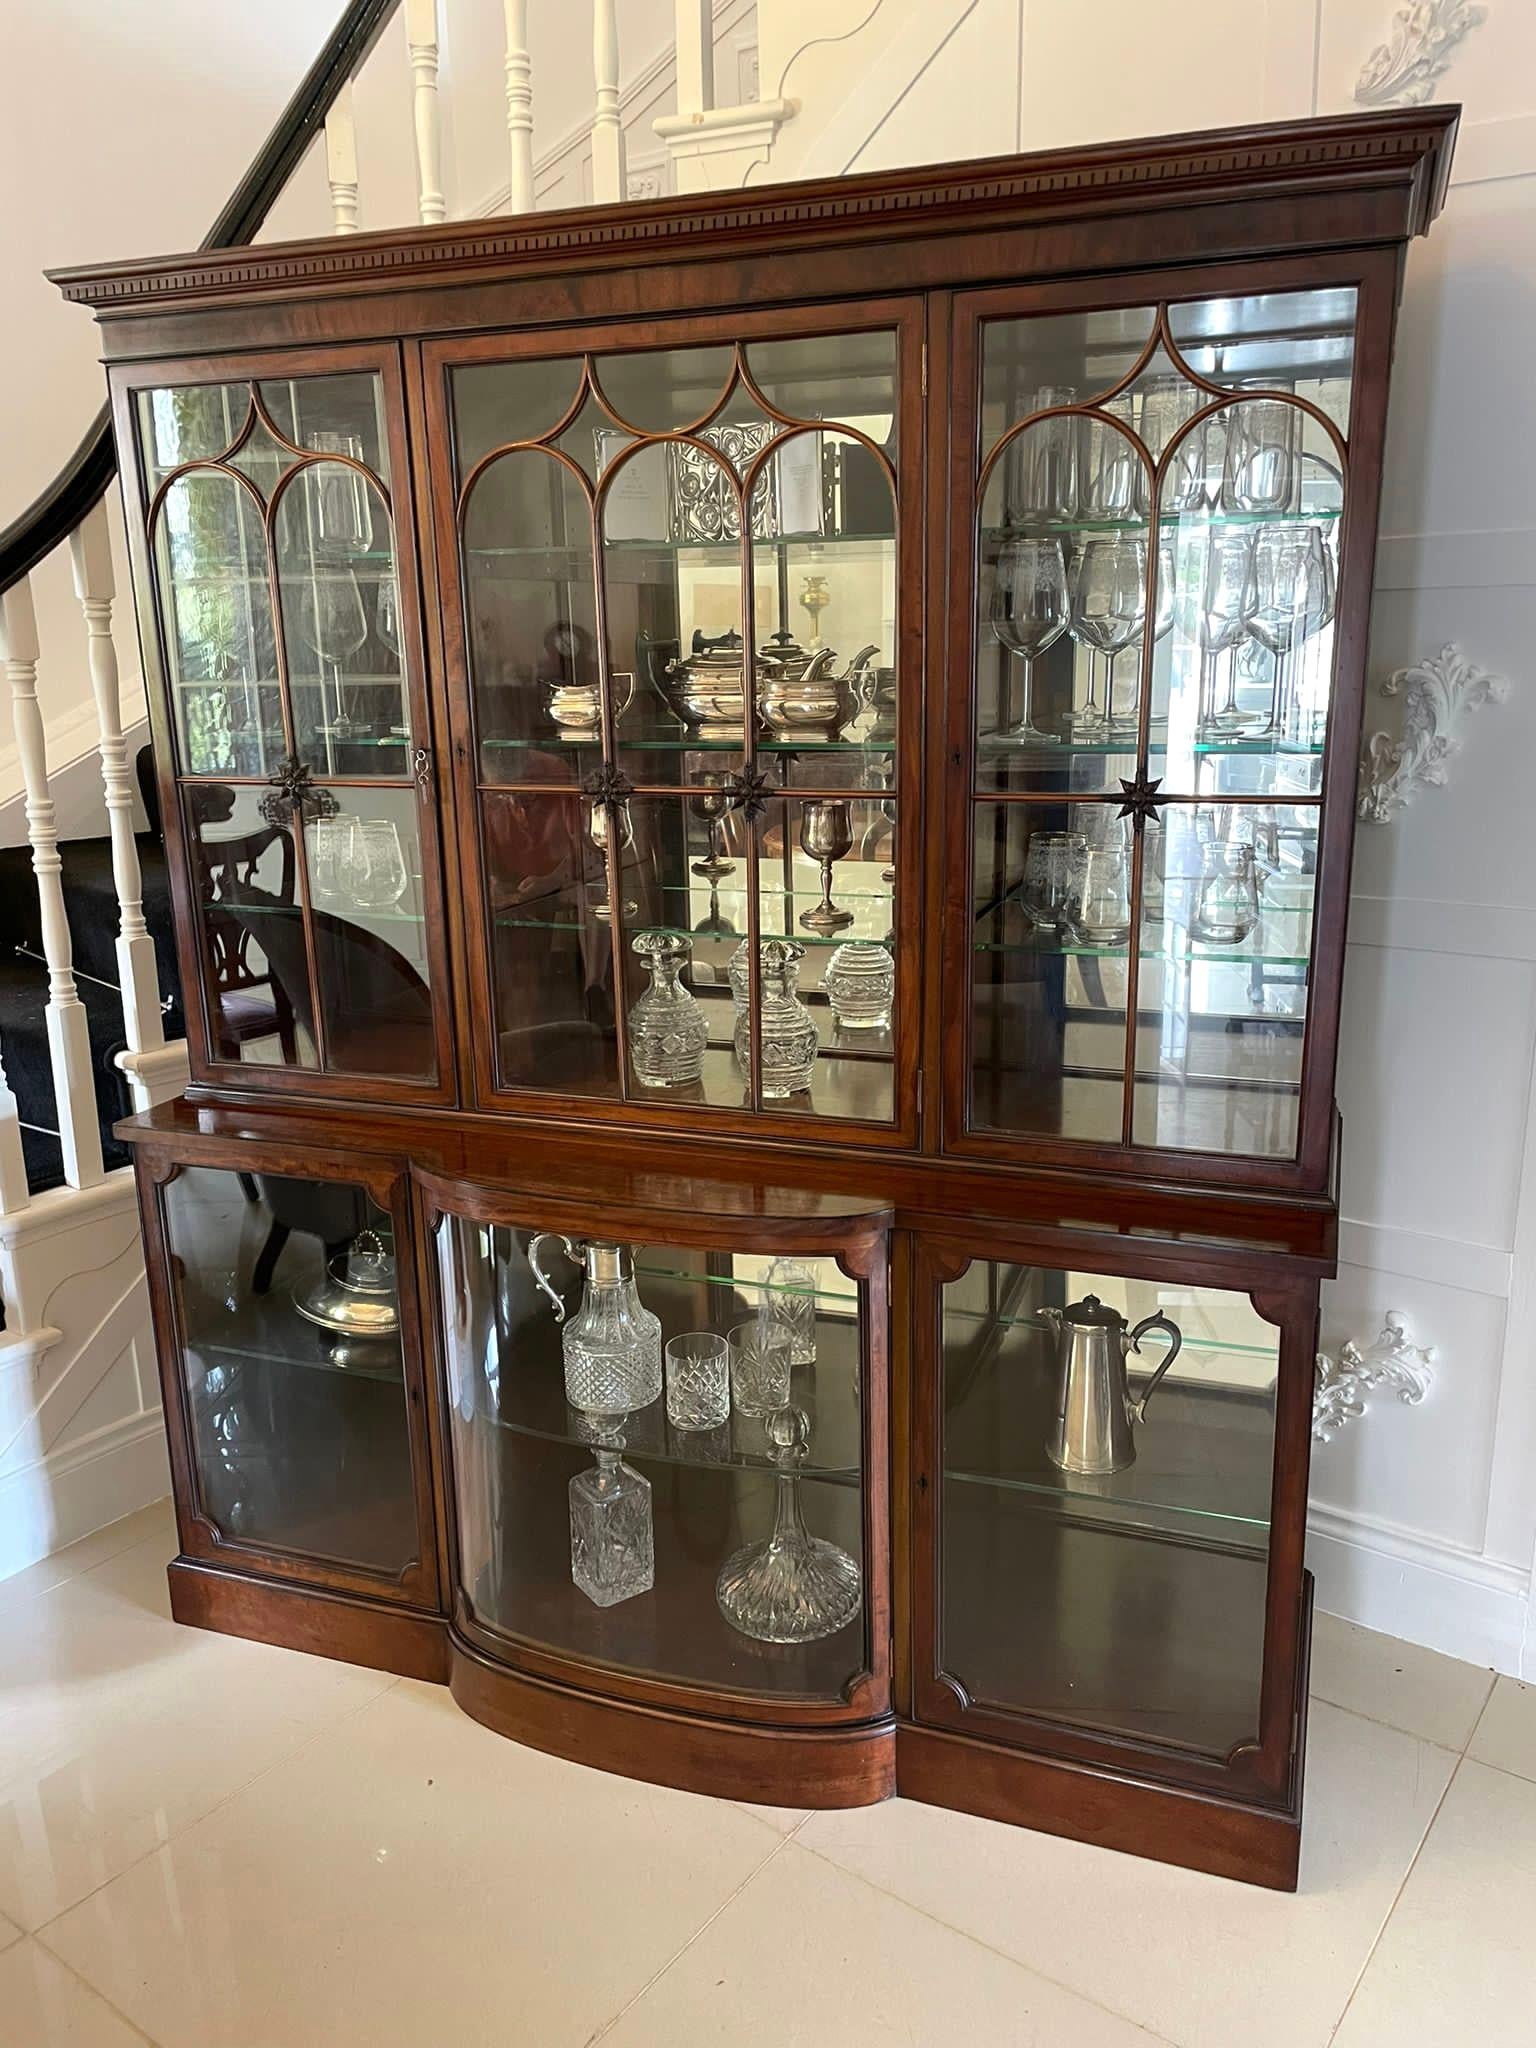 Outstanding quality antique Edwardian mahogany astral glazed display cabinet having a moulded cornice above a figured mahogany frieze with pretty inlaid ebony stringing above three outstanding quality astral glazed and carved mahogany doors with